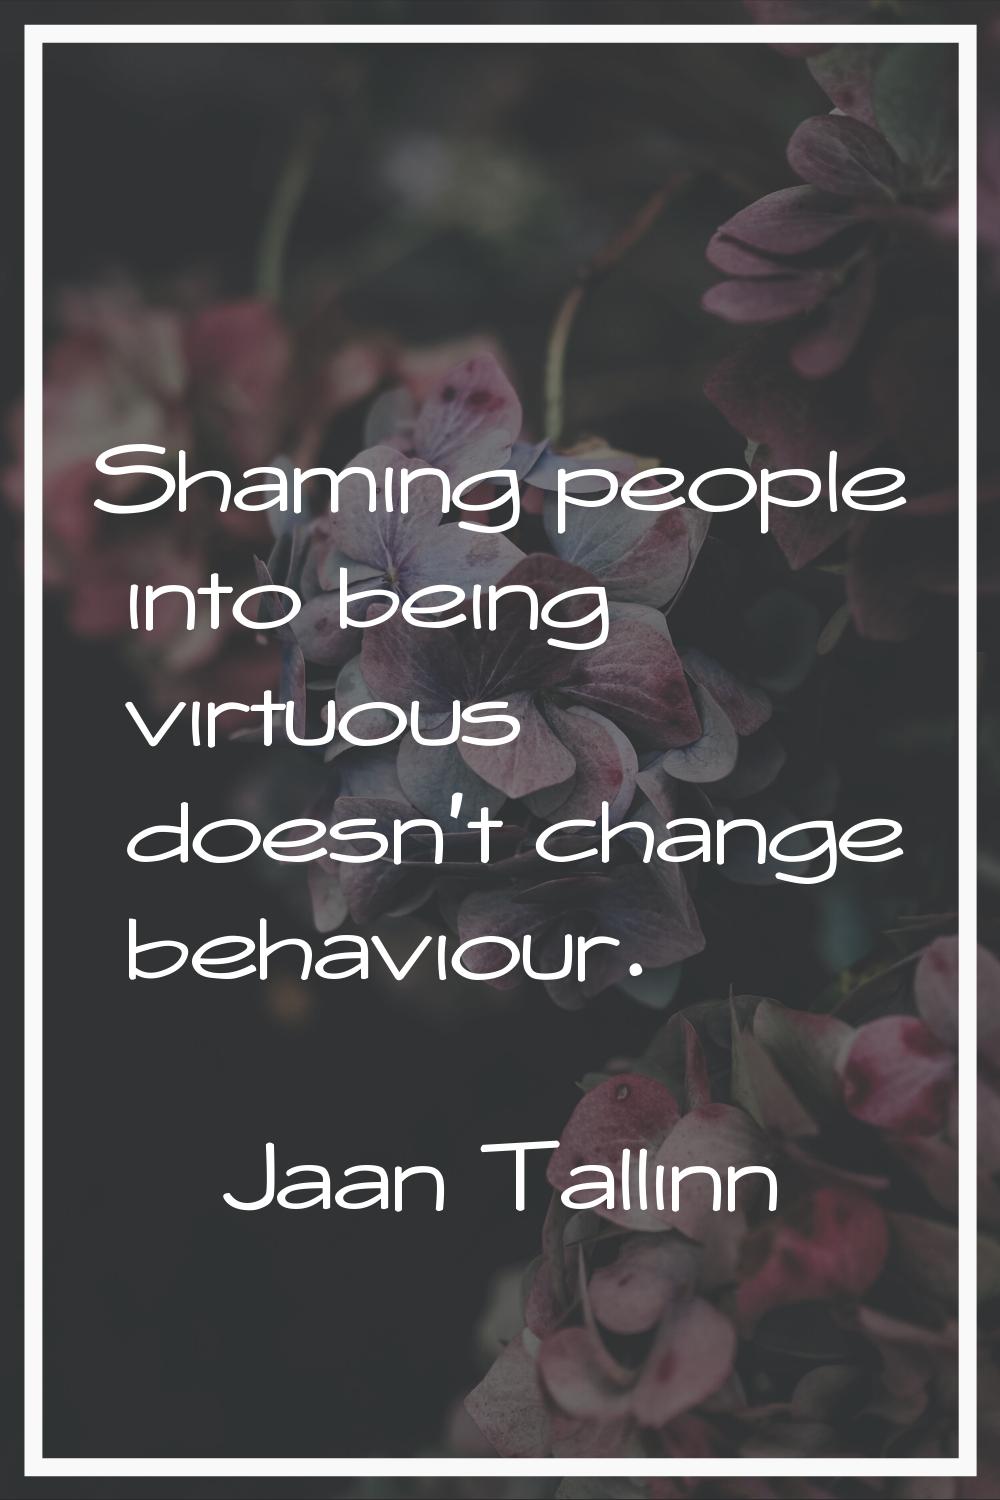 Shaming people into being virtuous doesn't change behaviour.